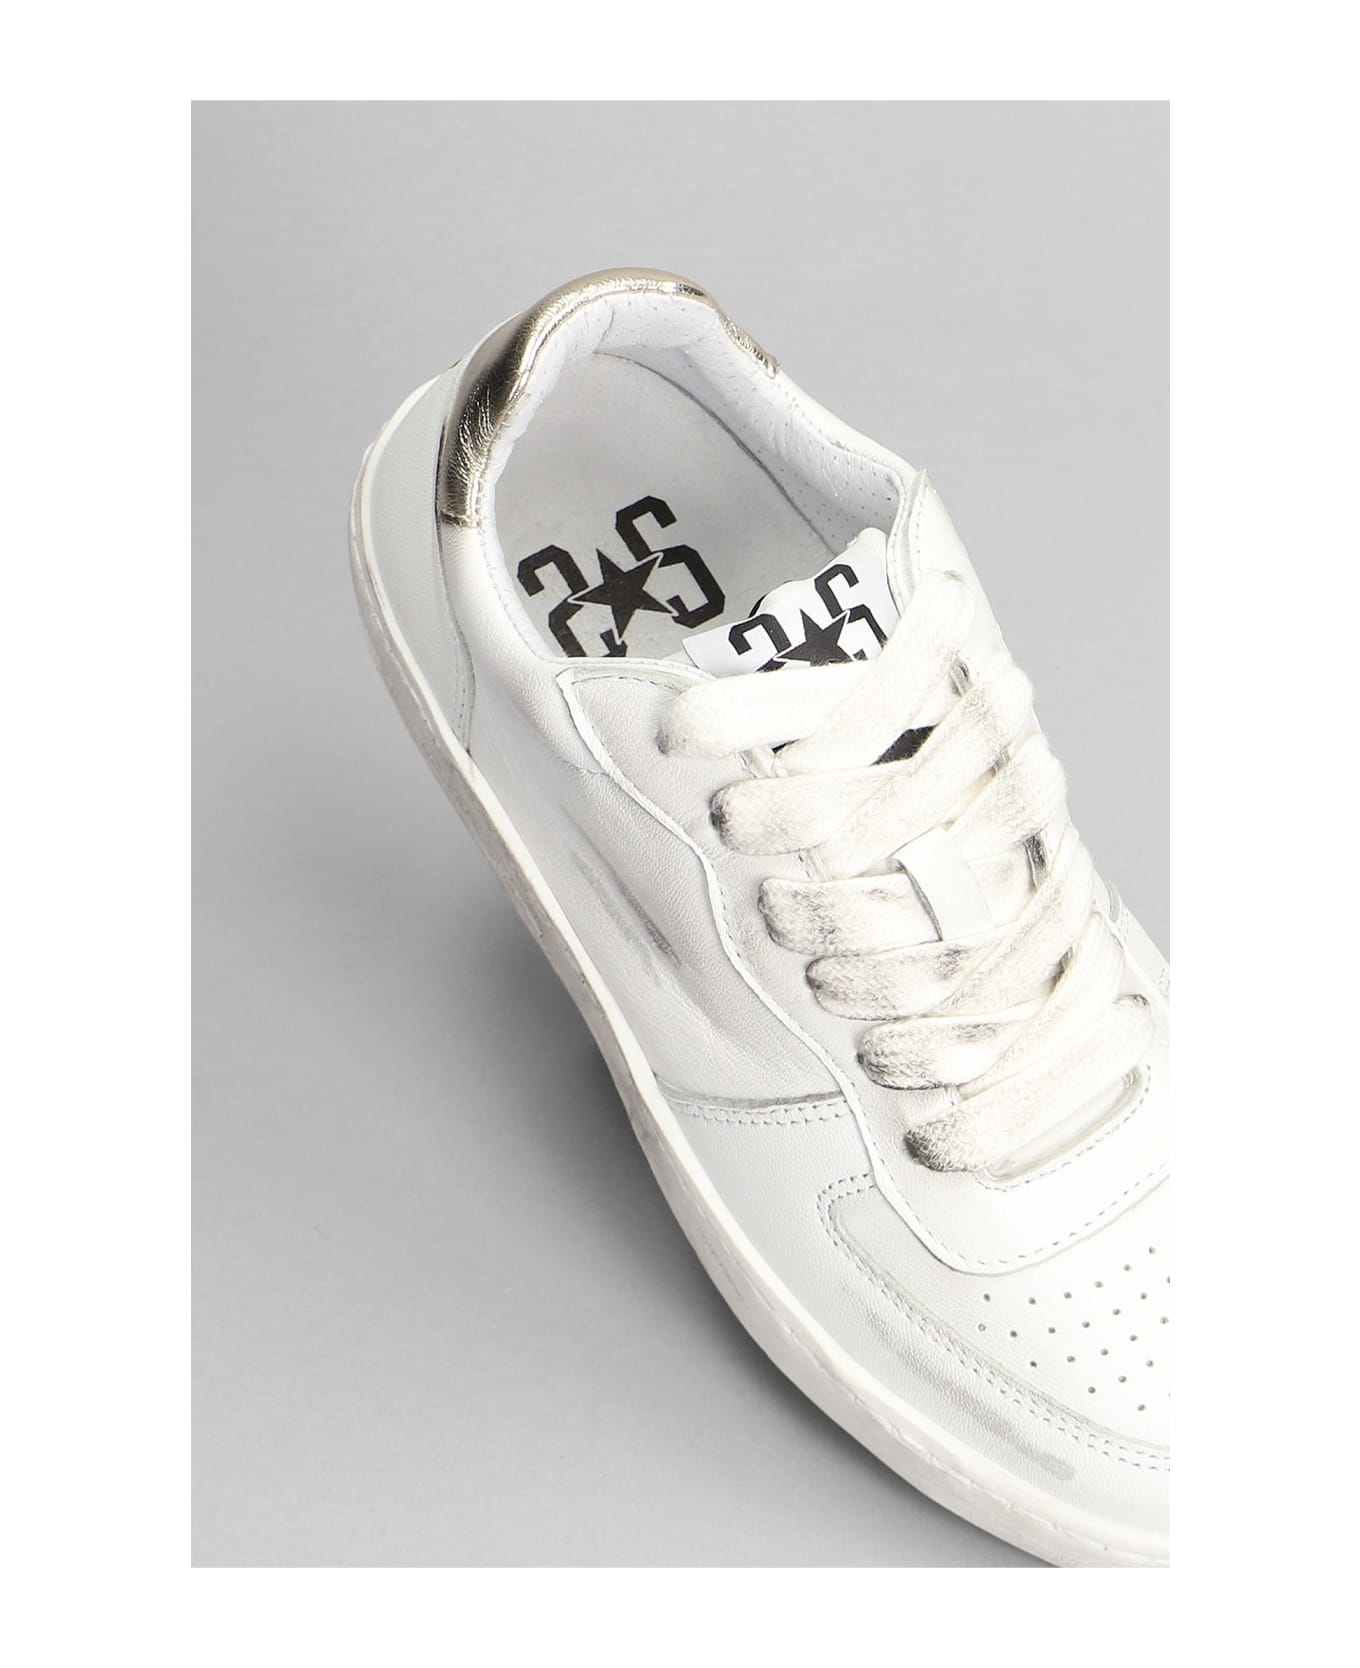 2Star Padel Star Sneakers In White Suede And Leather - white スニーカー